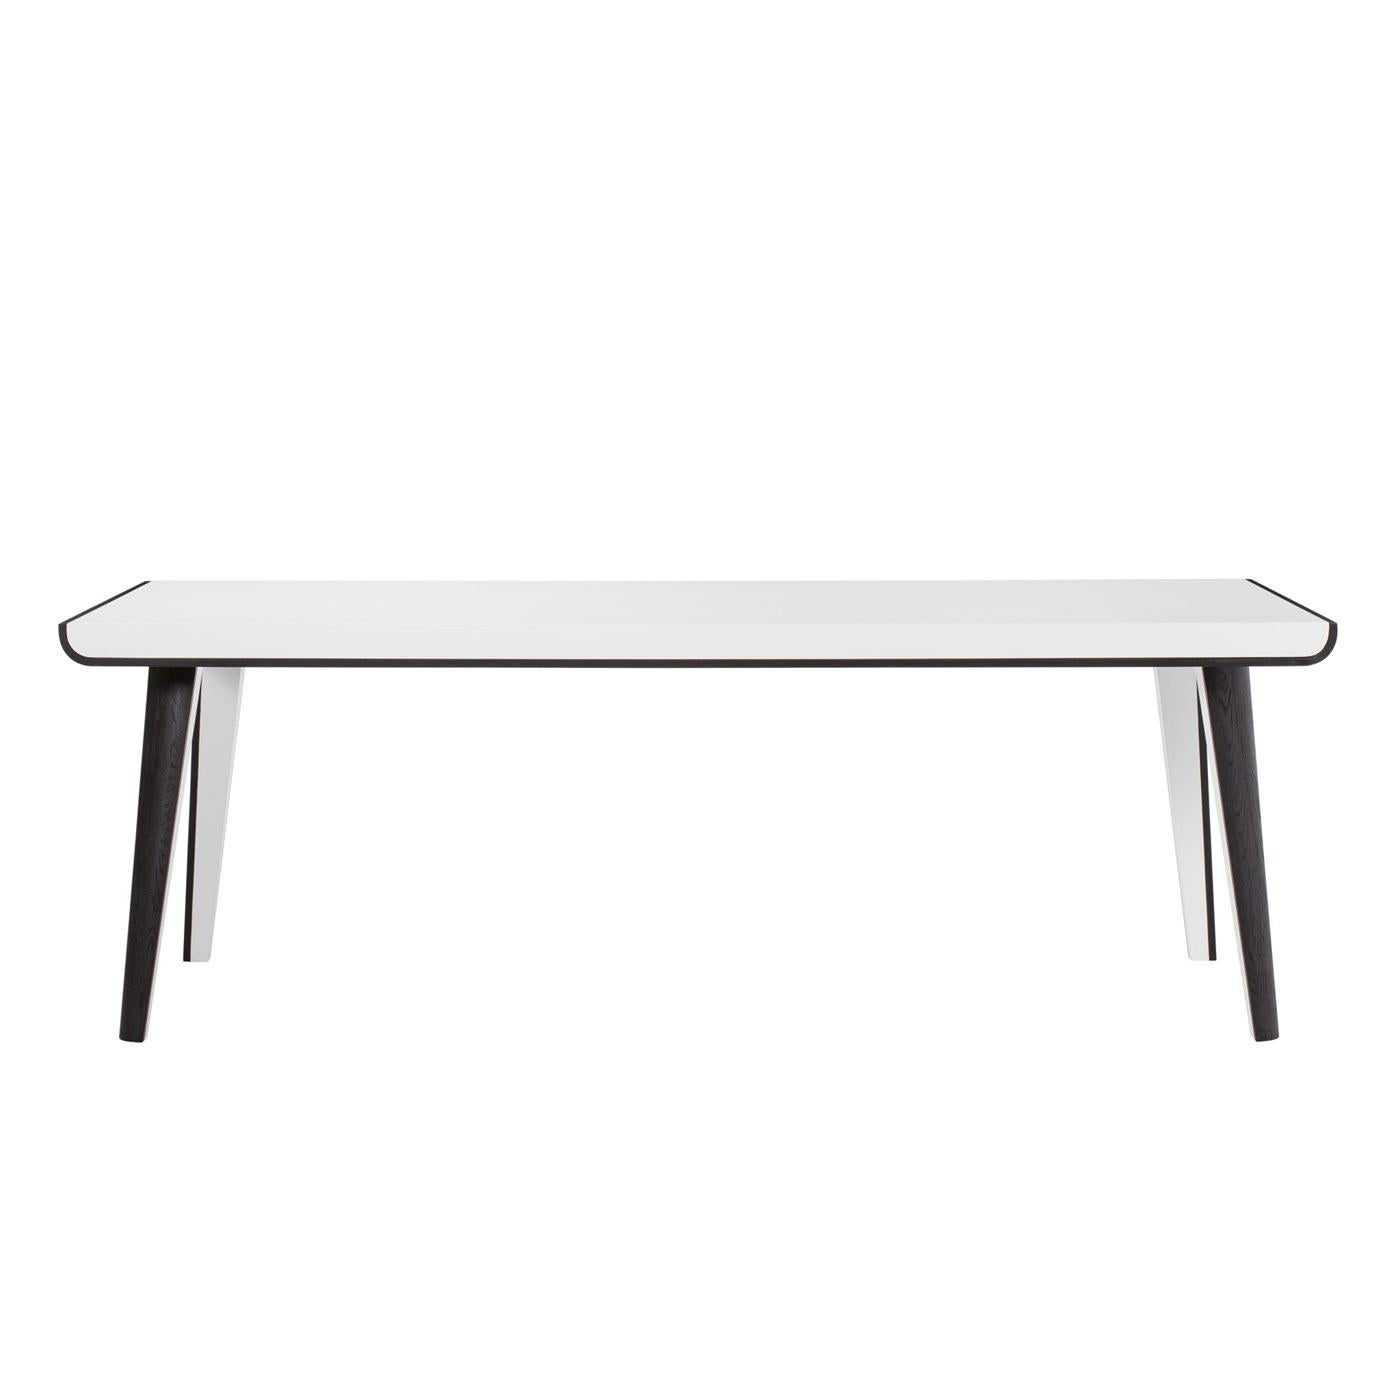 English Dominos Dining Table in White Matte Finish